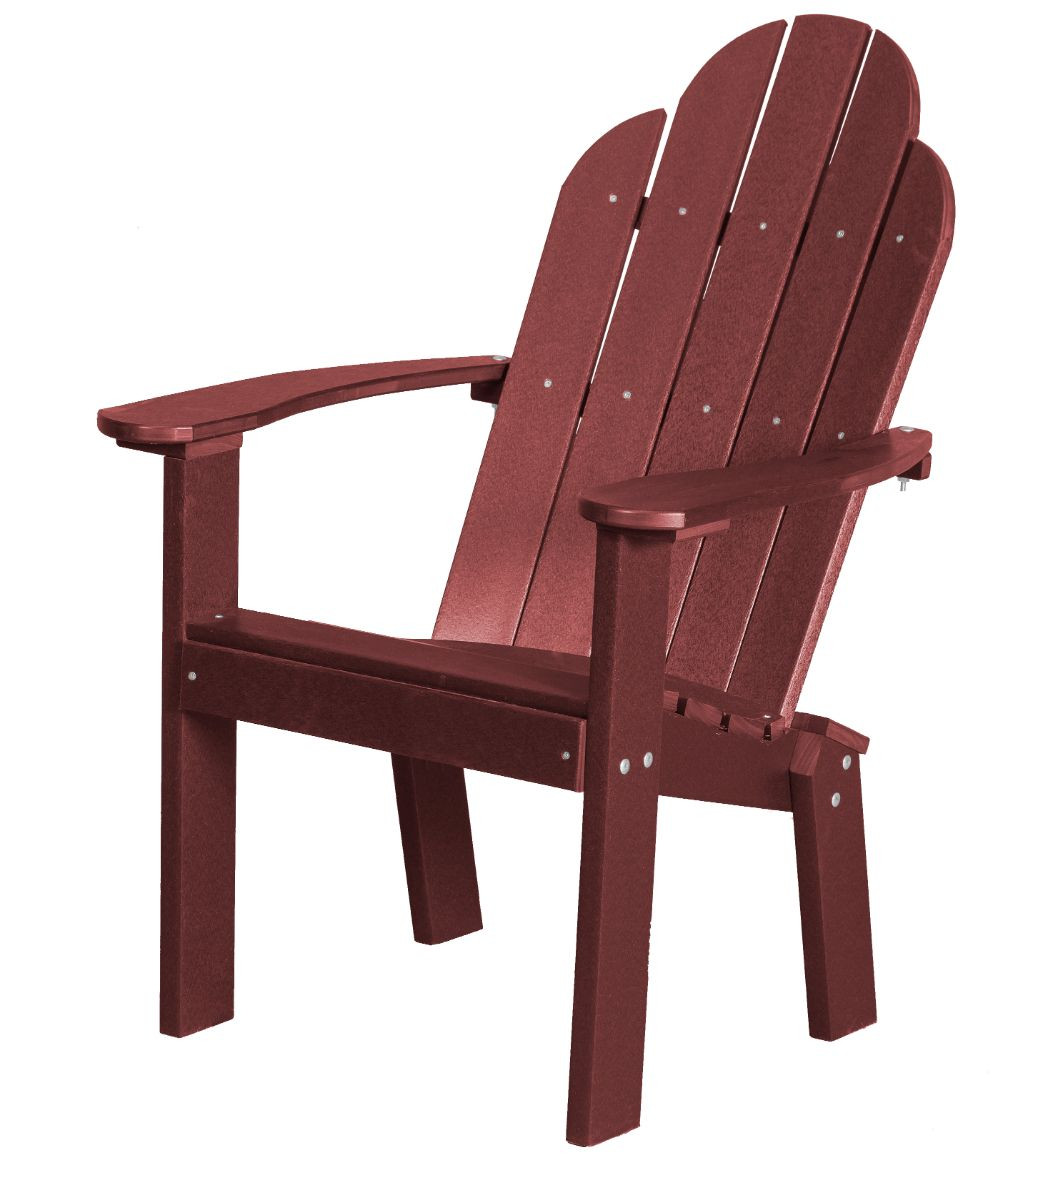 Cherry Wood Odessa Outdoor Dining Chair